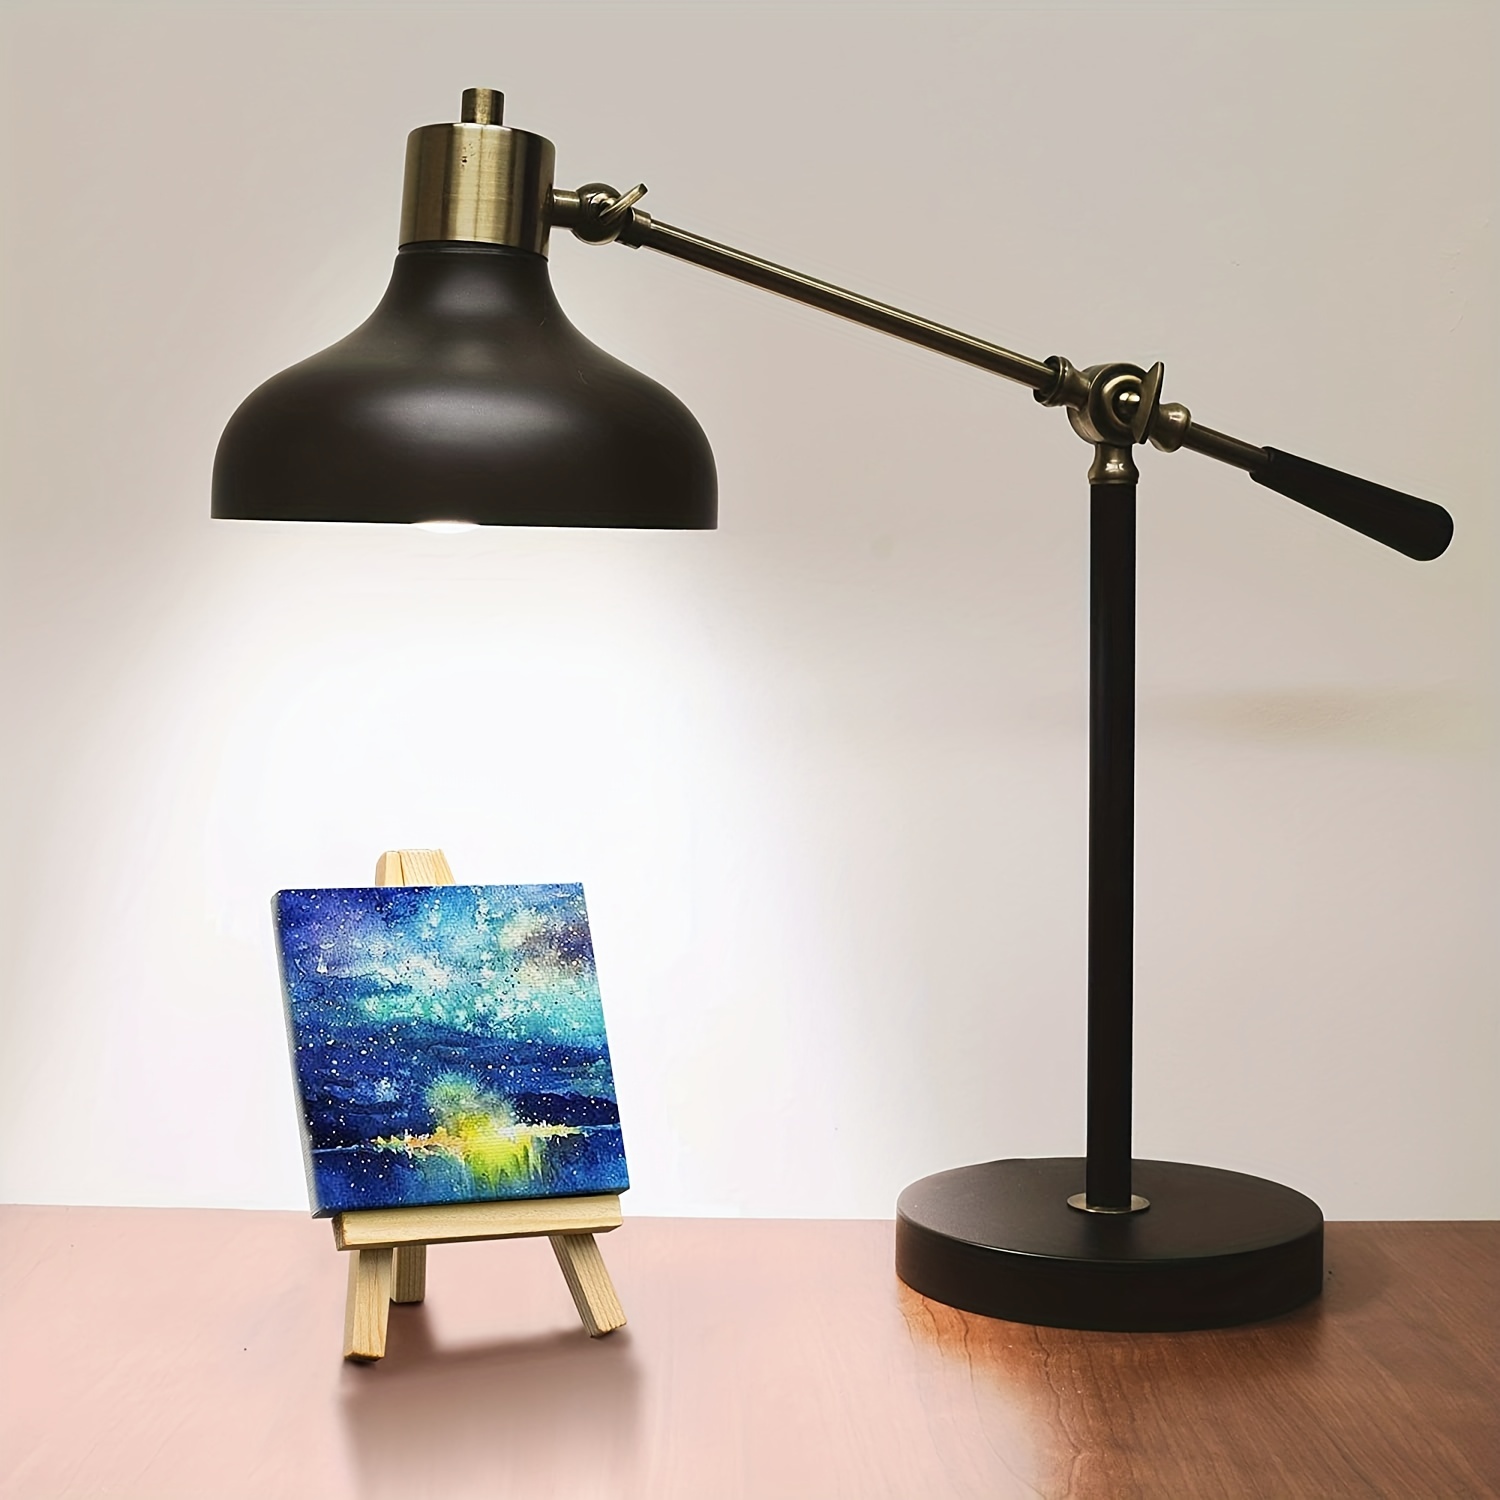 Small Easel with White Blank Cloth on a Wooden Table. Miniature Painting  Accessories Stock Photo - Image of exhibition, easel: 199067012